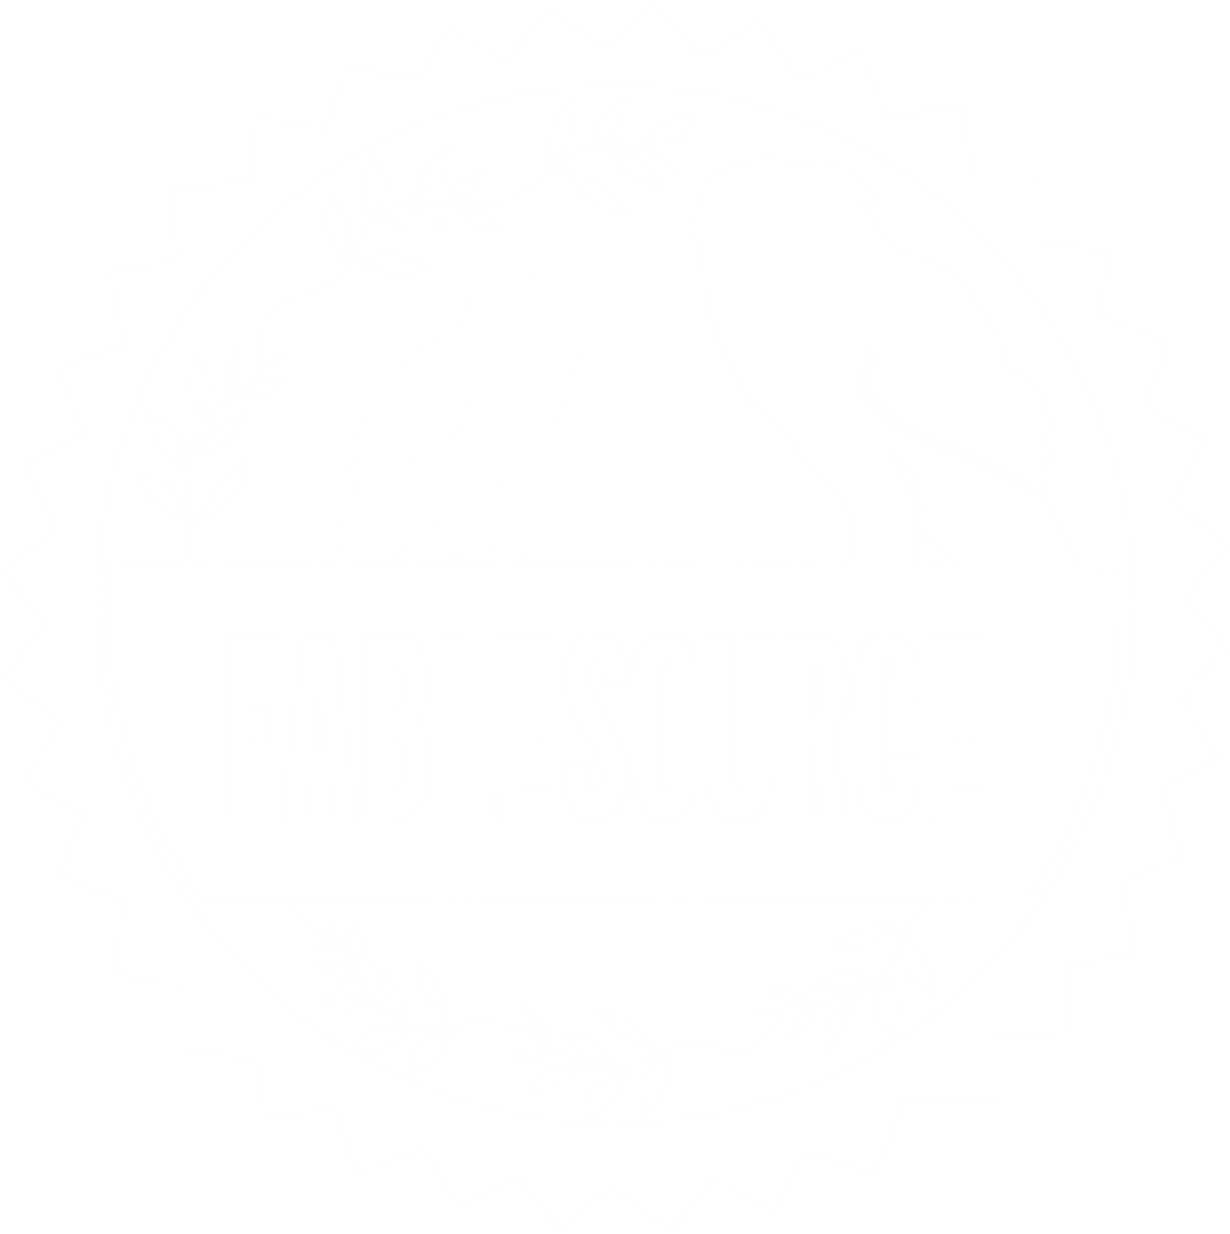 Fablesource